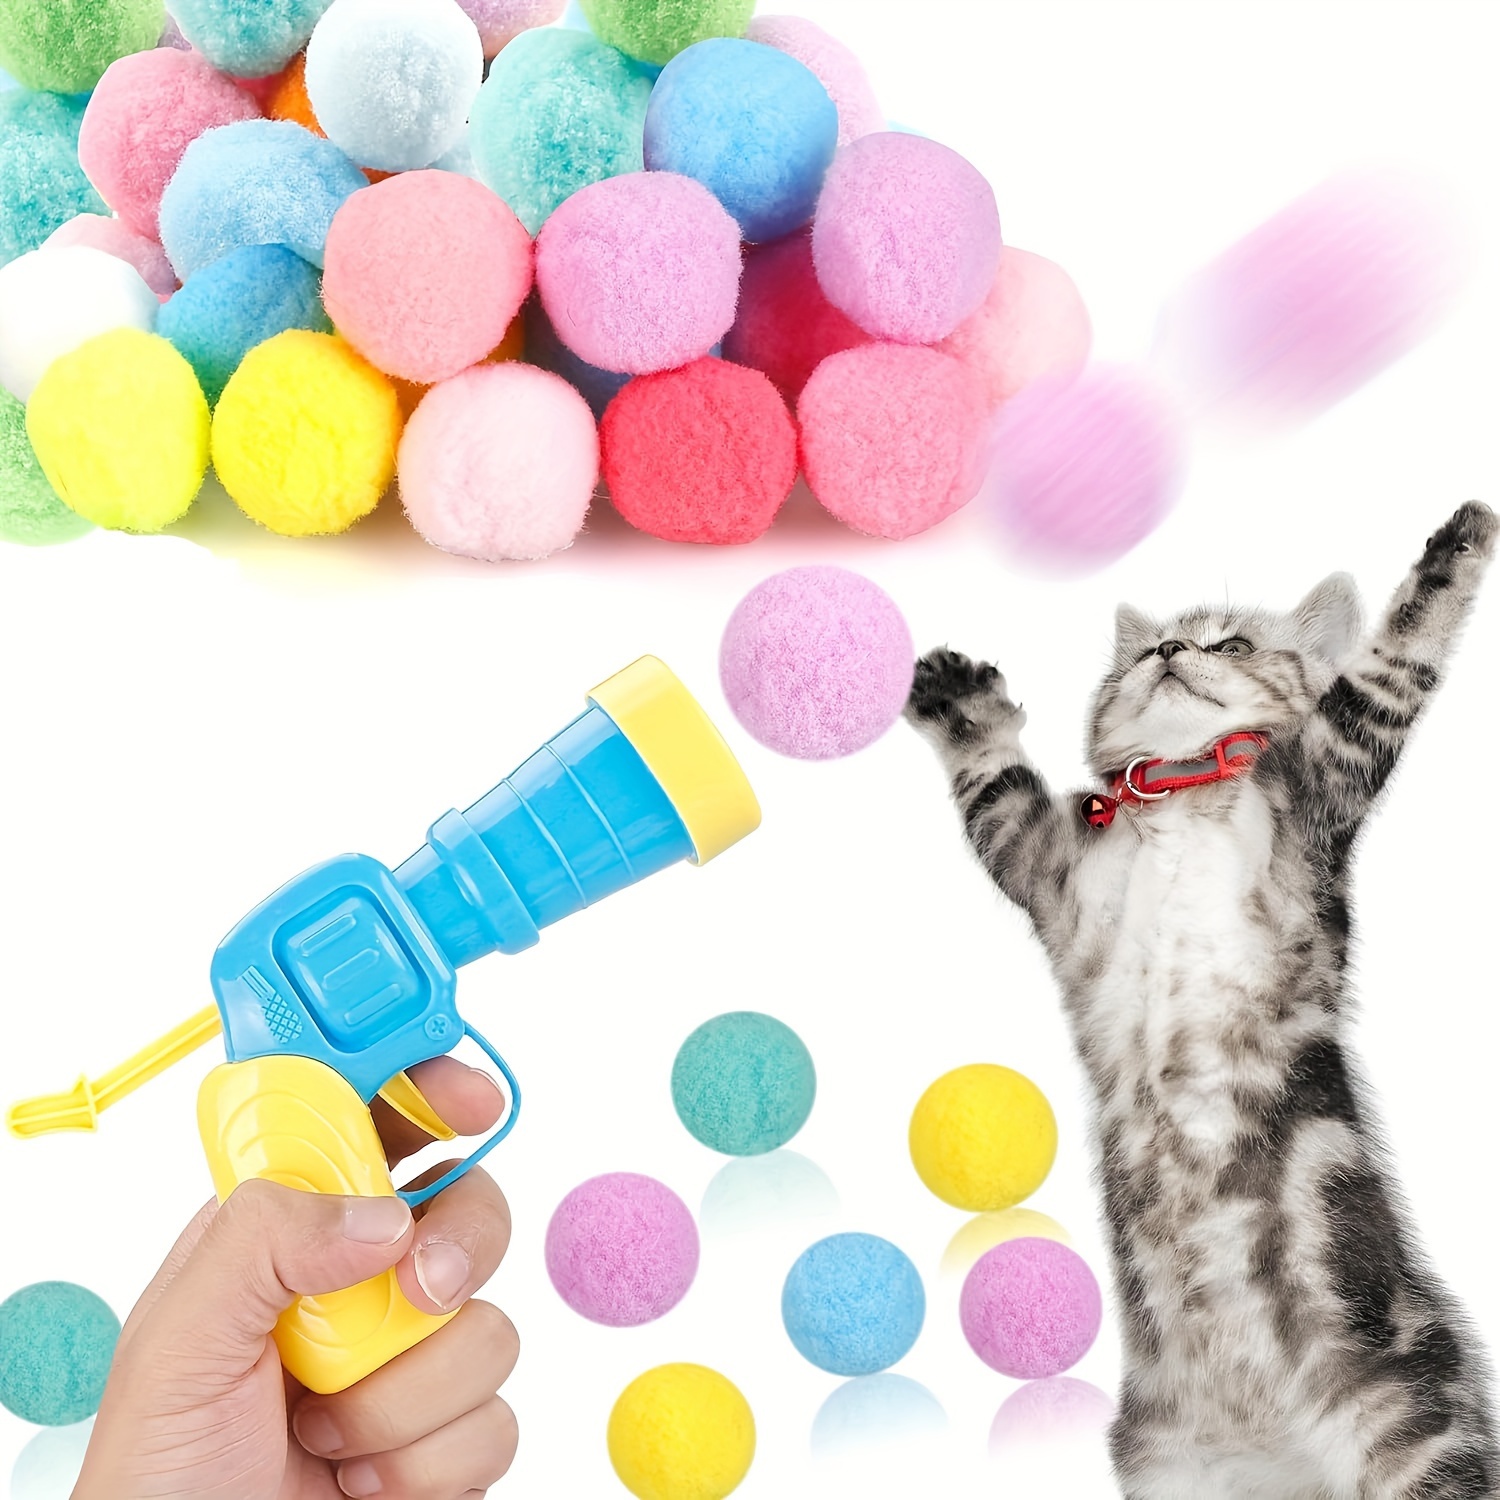 

self-entertainment" Interactive Cat Toy Launcher With 20 Plush Balls - Quiet, Durable & Lightweight For Endless Fun And Exercise